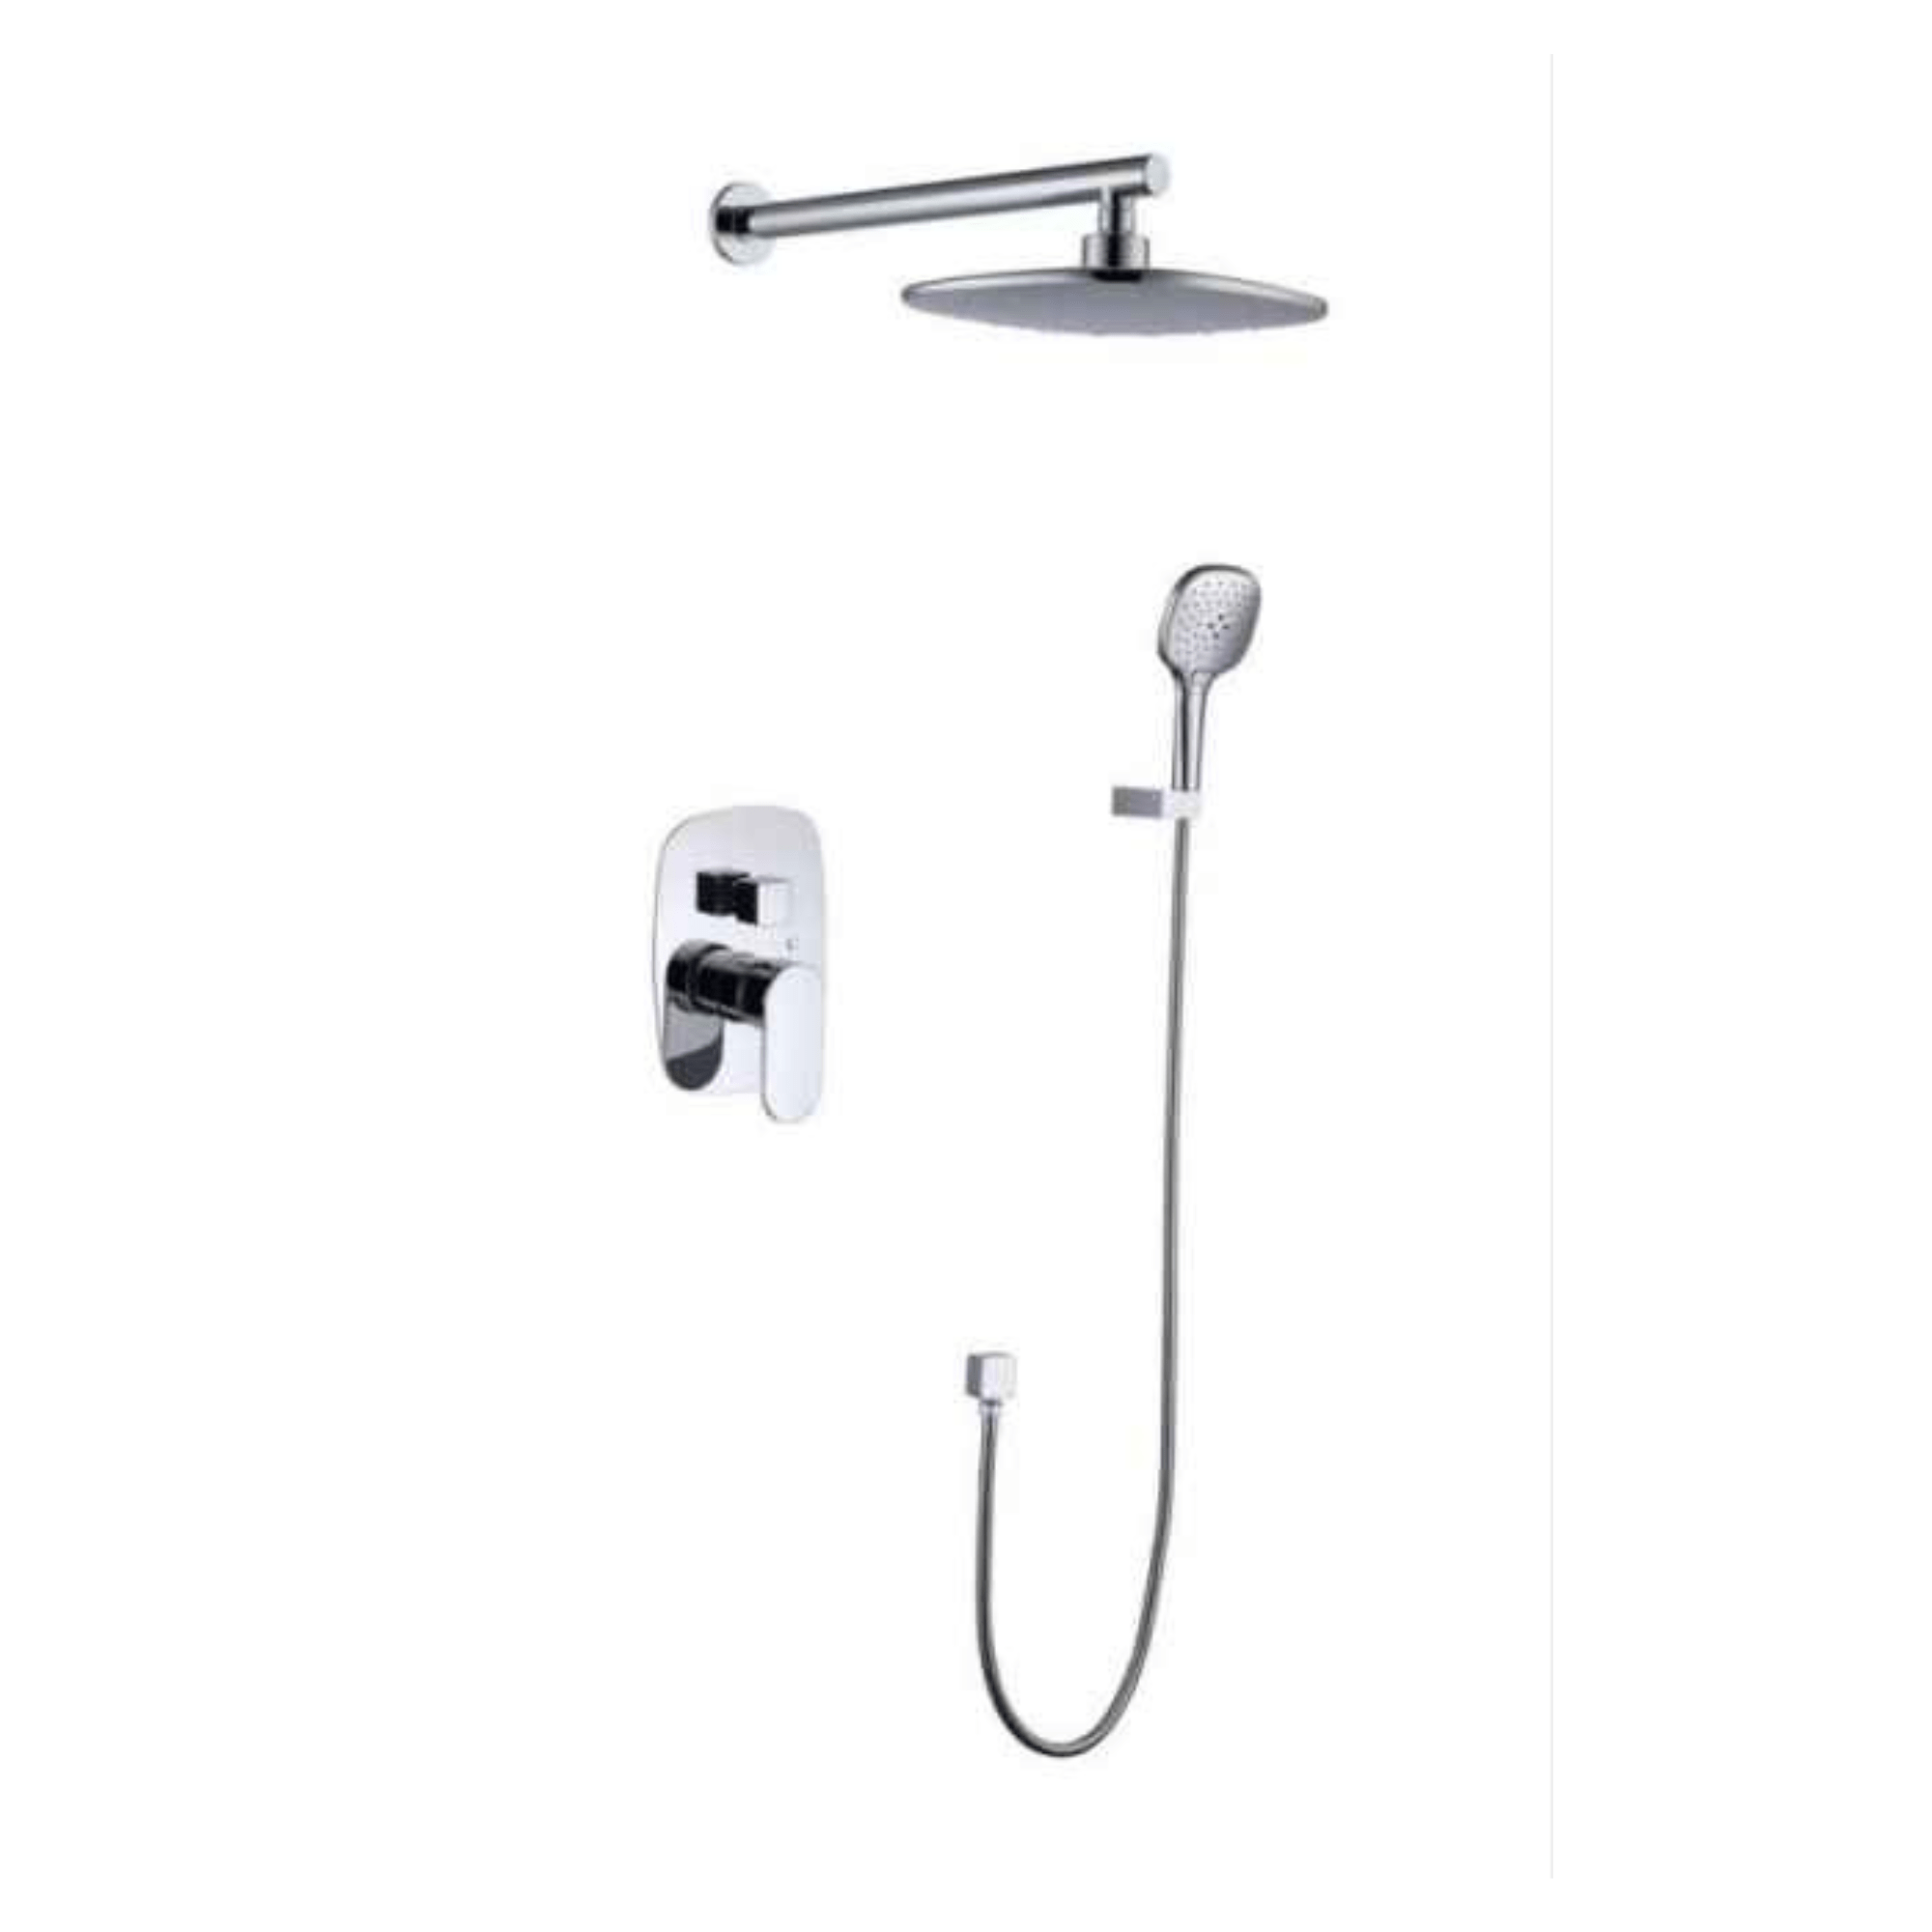 Buy Bathroom Concealed Wall Mounted Two-Function Round Overhead Rain Shower Set Chrome/Matte Black - RS-9006 & RS-9006B | Shop at Supply Master Accra, Ghana Shower Set Buy Tools hardware Building materials